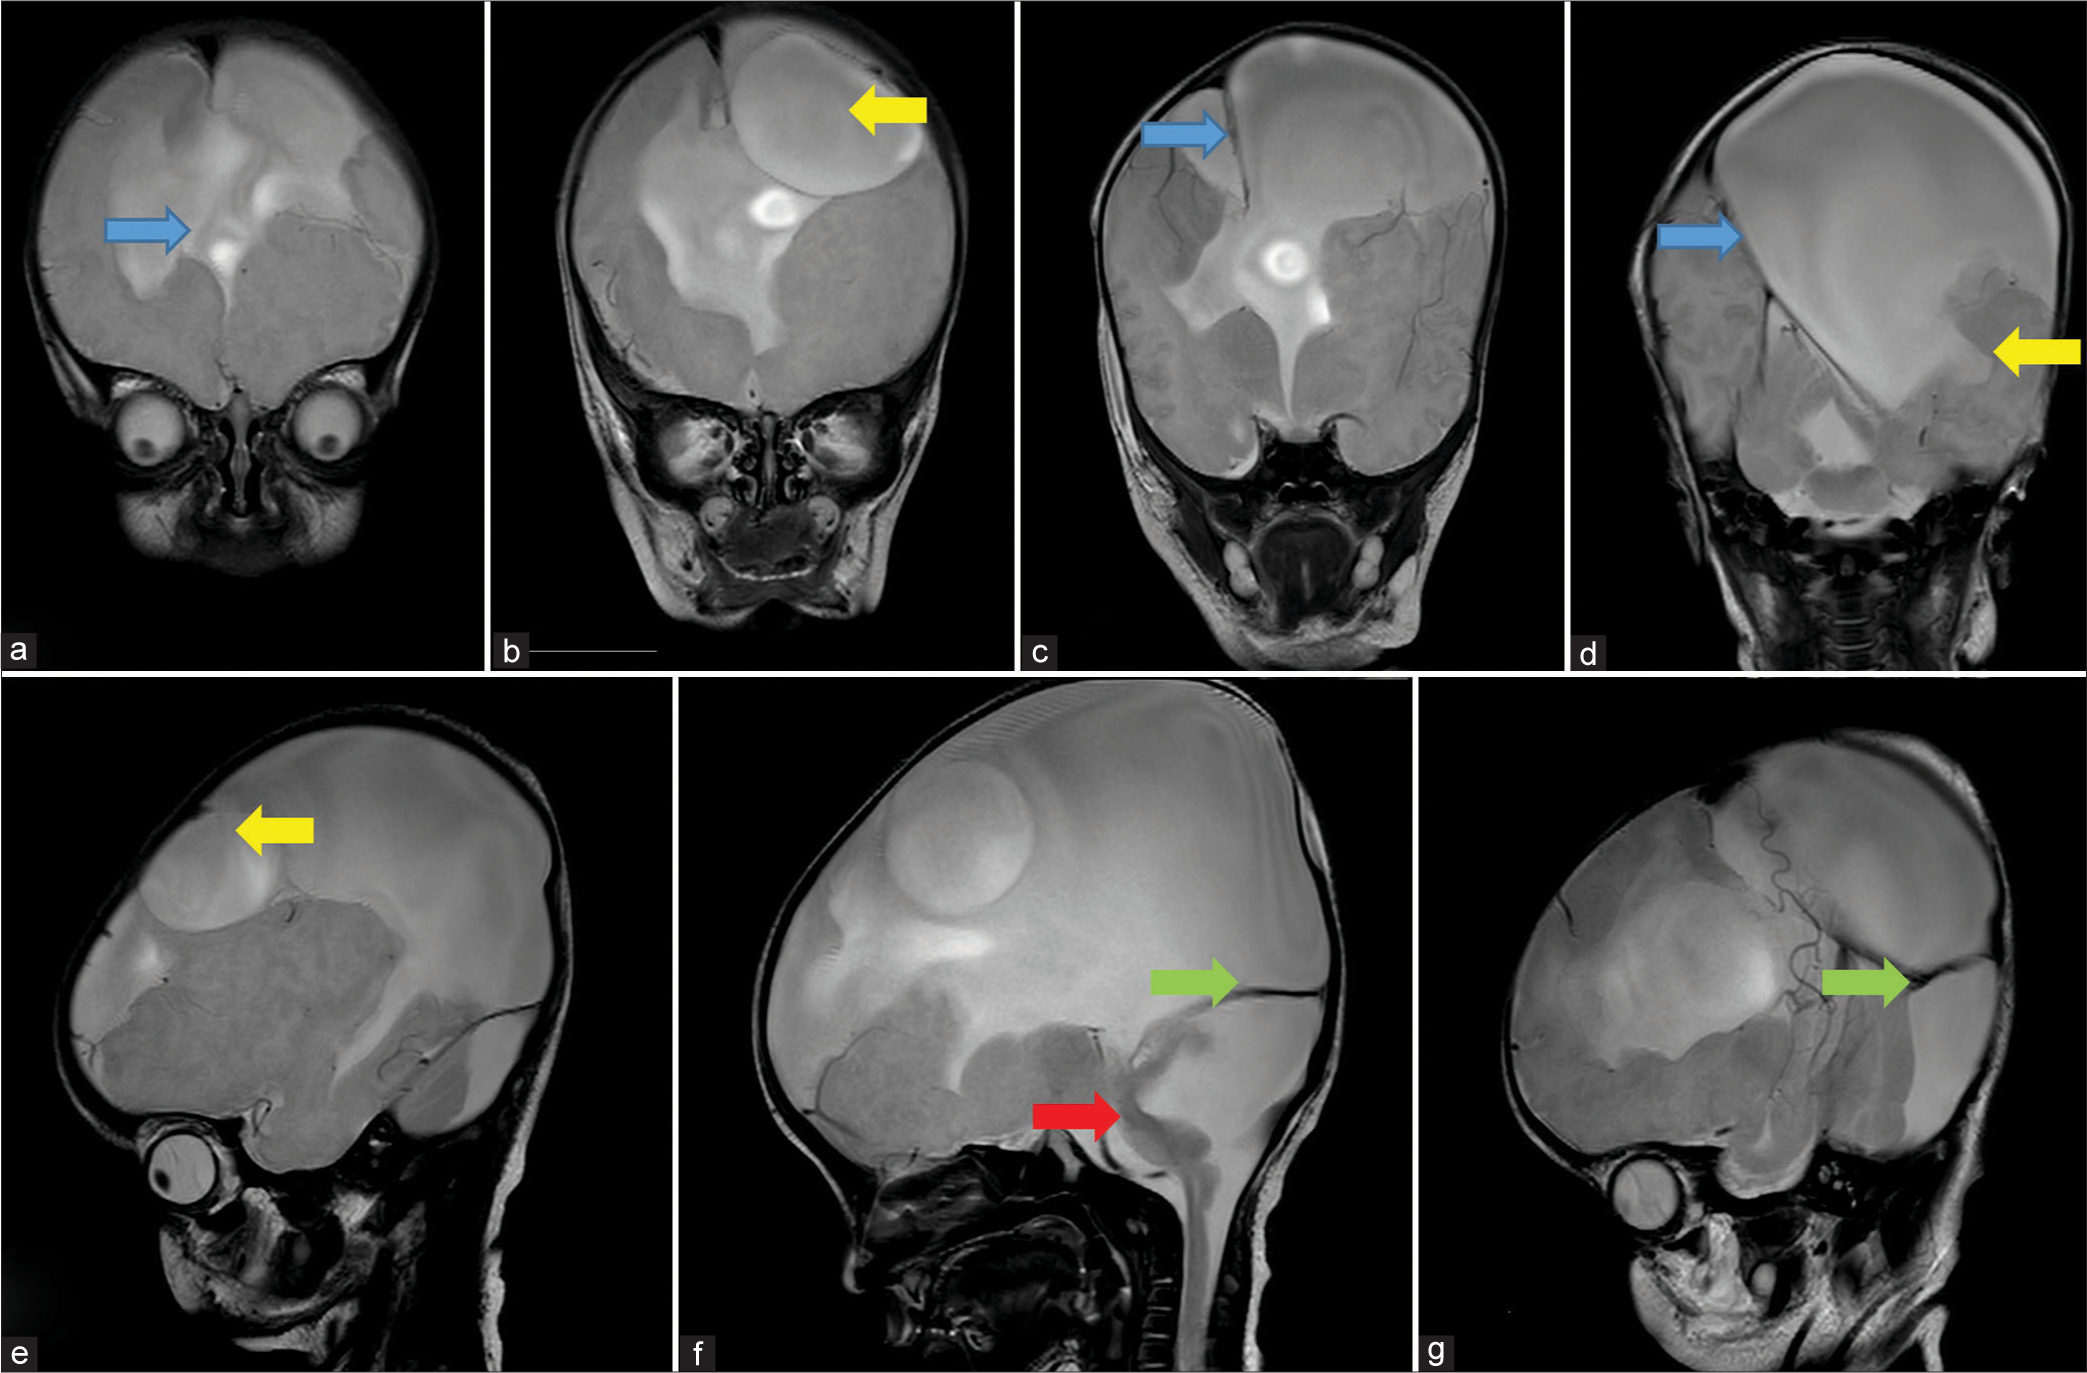 Sequential coronal (a-d) and Sagittal (e-g) T2 weighted MRI images shows: (a) absence of anterior falx cerebri (blue arrow), (b) inter-hemispheric cyst (yellow arrow), (c) presence of falx cerebri in posterior aspect (blue arrow), (d) inter-hemispheric cyst communicating with lateral ventricle (yellow arrow) and presence of falx cerebri further posteriorly (blue arrow), (e) inter-hemispheric cyst (yellow arrow), (f) cerebellar hypoplasia with large posterior fossa cyst (red arrow) causing torcular inversion (green arrow) and, (g) High tentorium cerebelli signifying torcular inversion (green arrow).